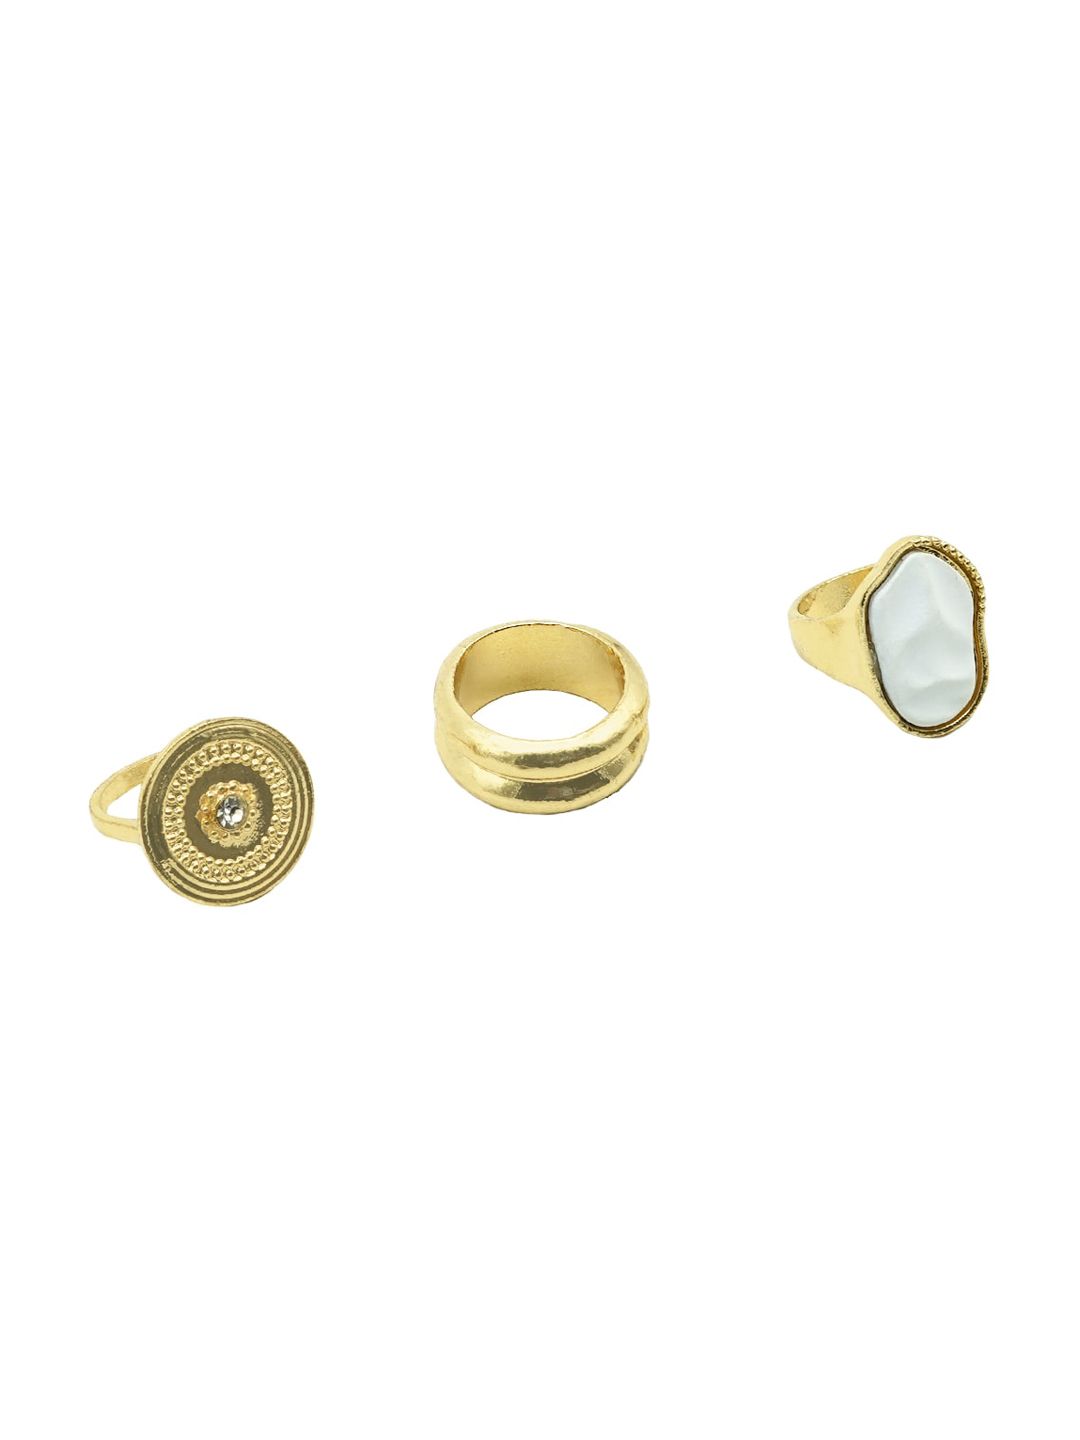 JOKER & WITCH Set Of 3 Gold-Plated & White Pitti Pisa Finger Rings Price in India